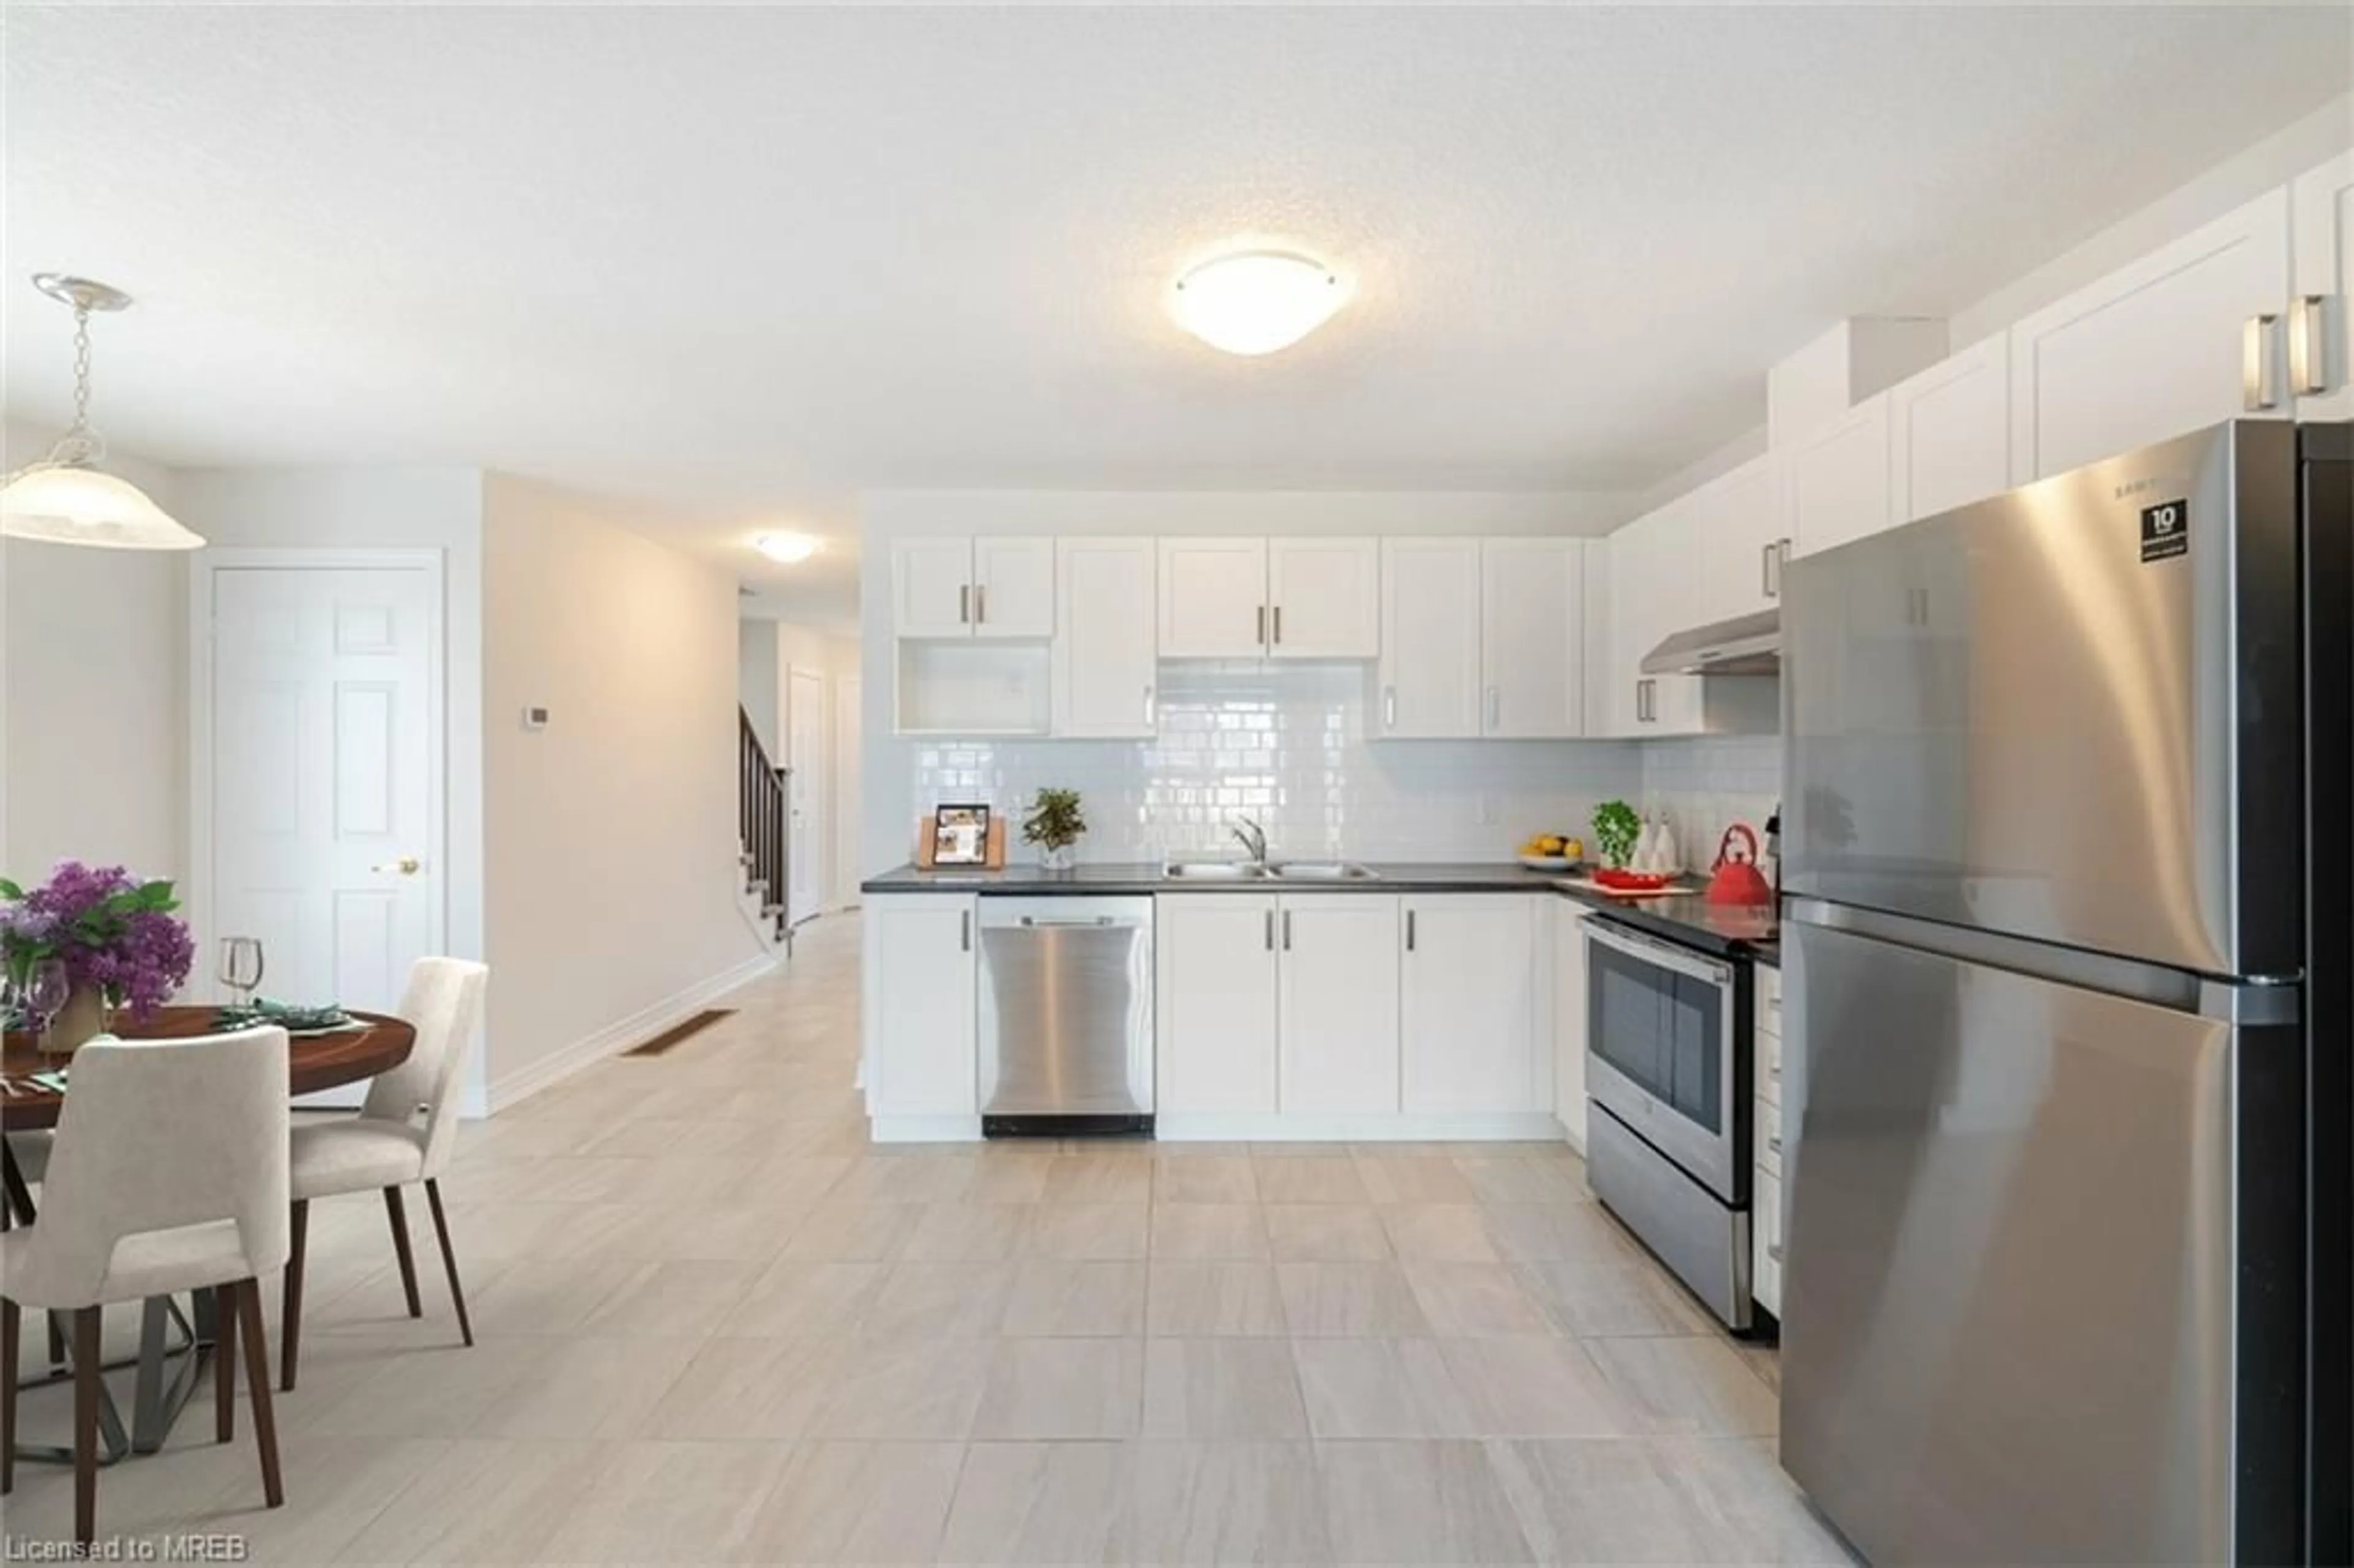 Standard kitchen for 15 Archer Ave, Collingwood Ontario L6Y 3B7